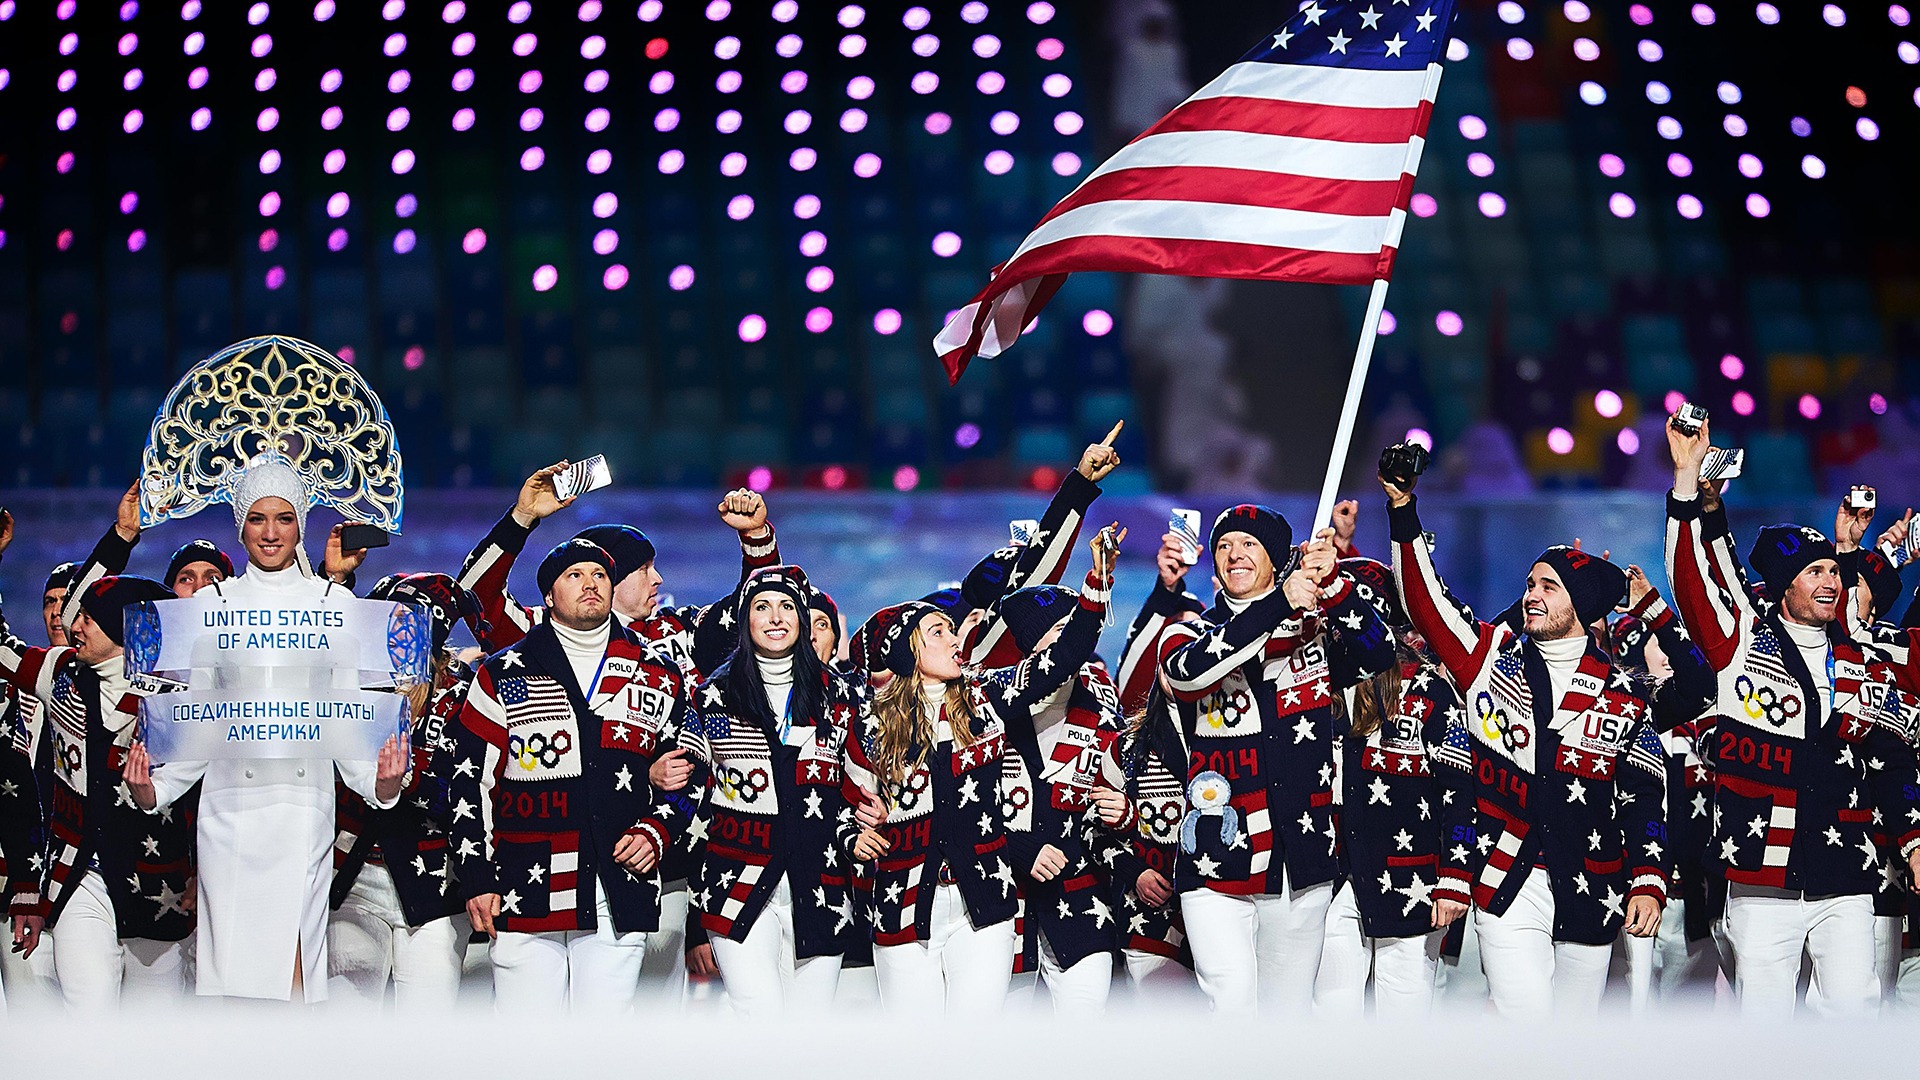 Todd Lockwick smiles and holds high the U.S. flag as Team USA athletes wave